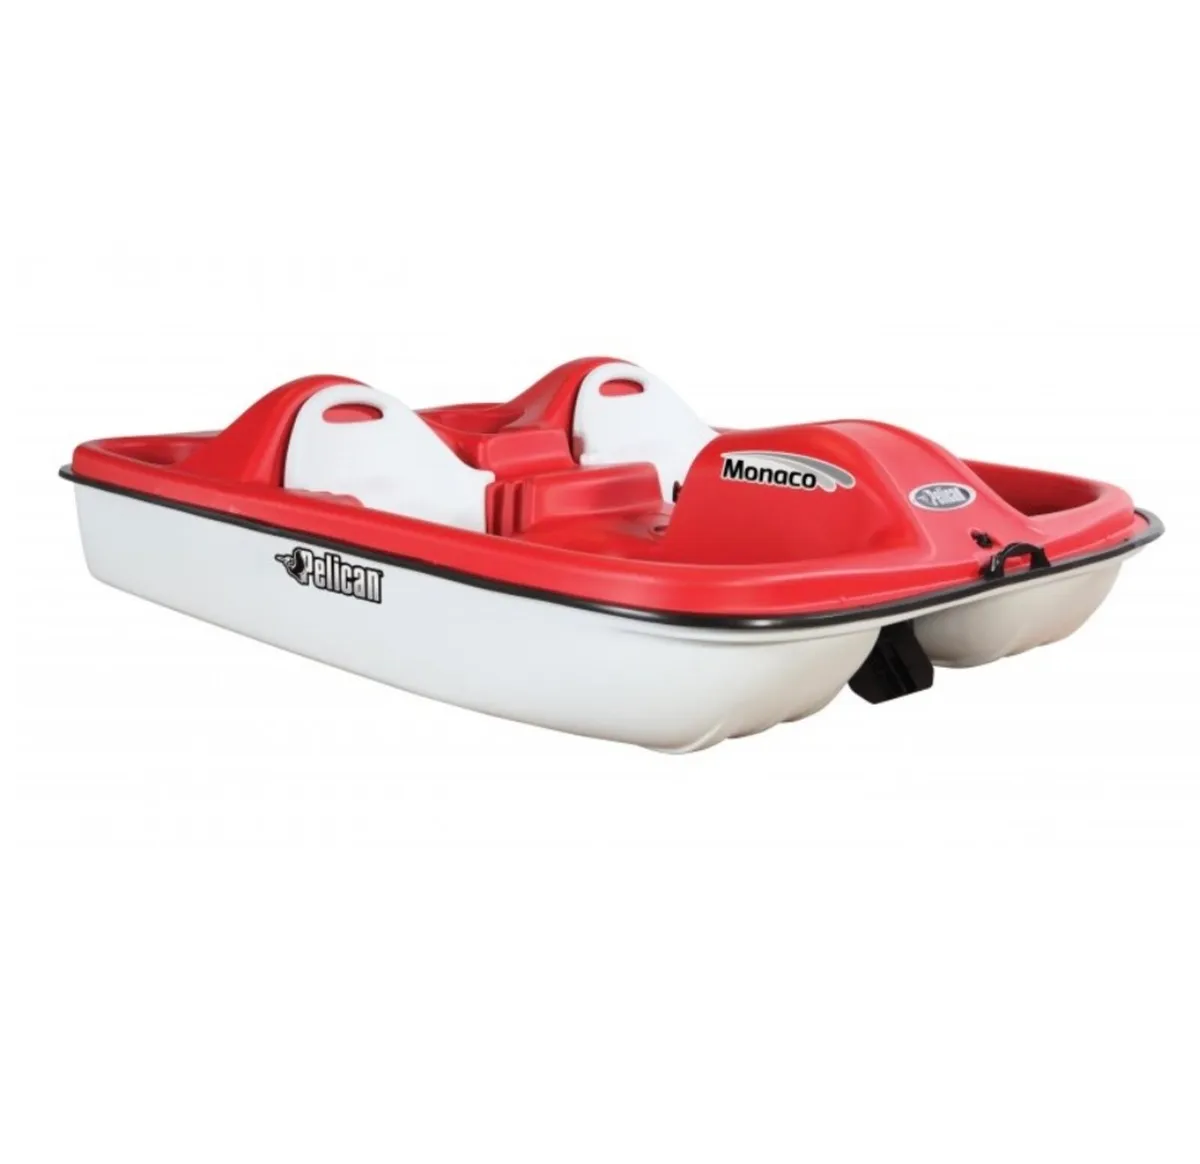 Pedal Boat - Image 1